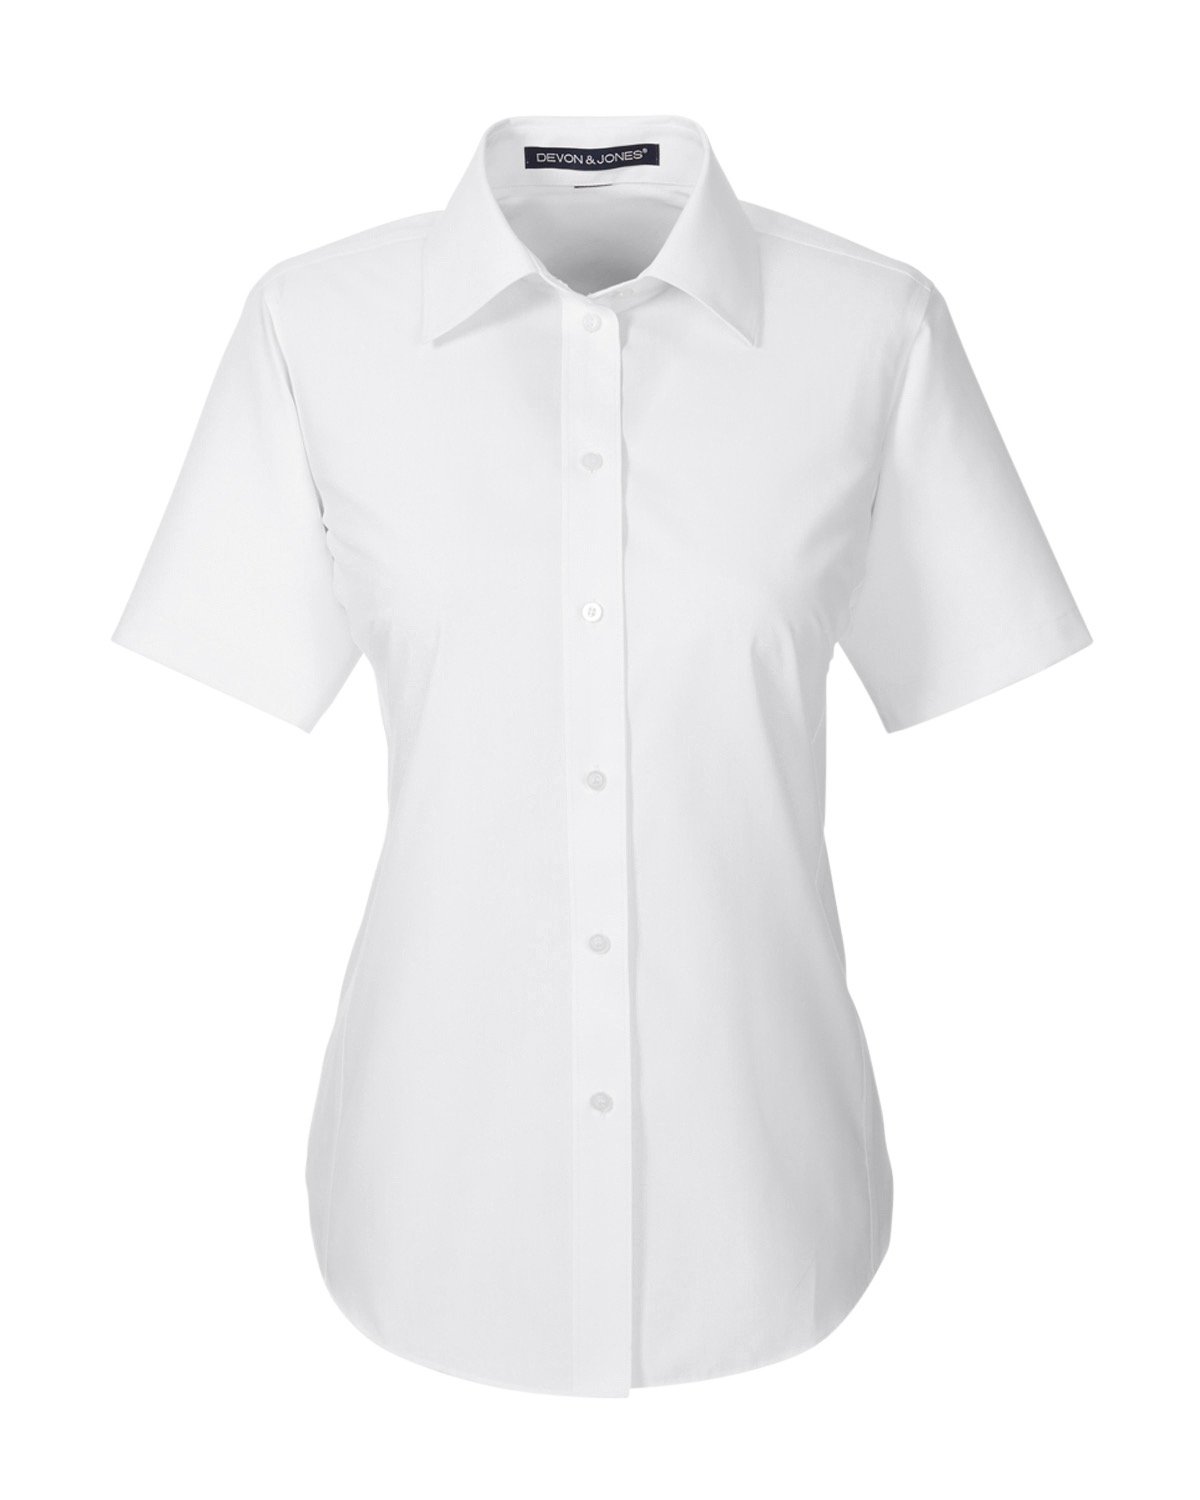 Picture of Devon & Jones Women's Crown Woven Collection® Solid Broadcloth Short-Sleeve Shirt